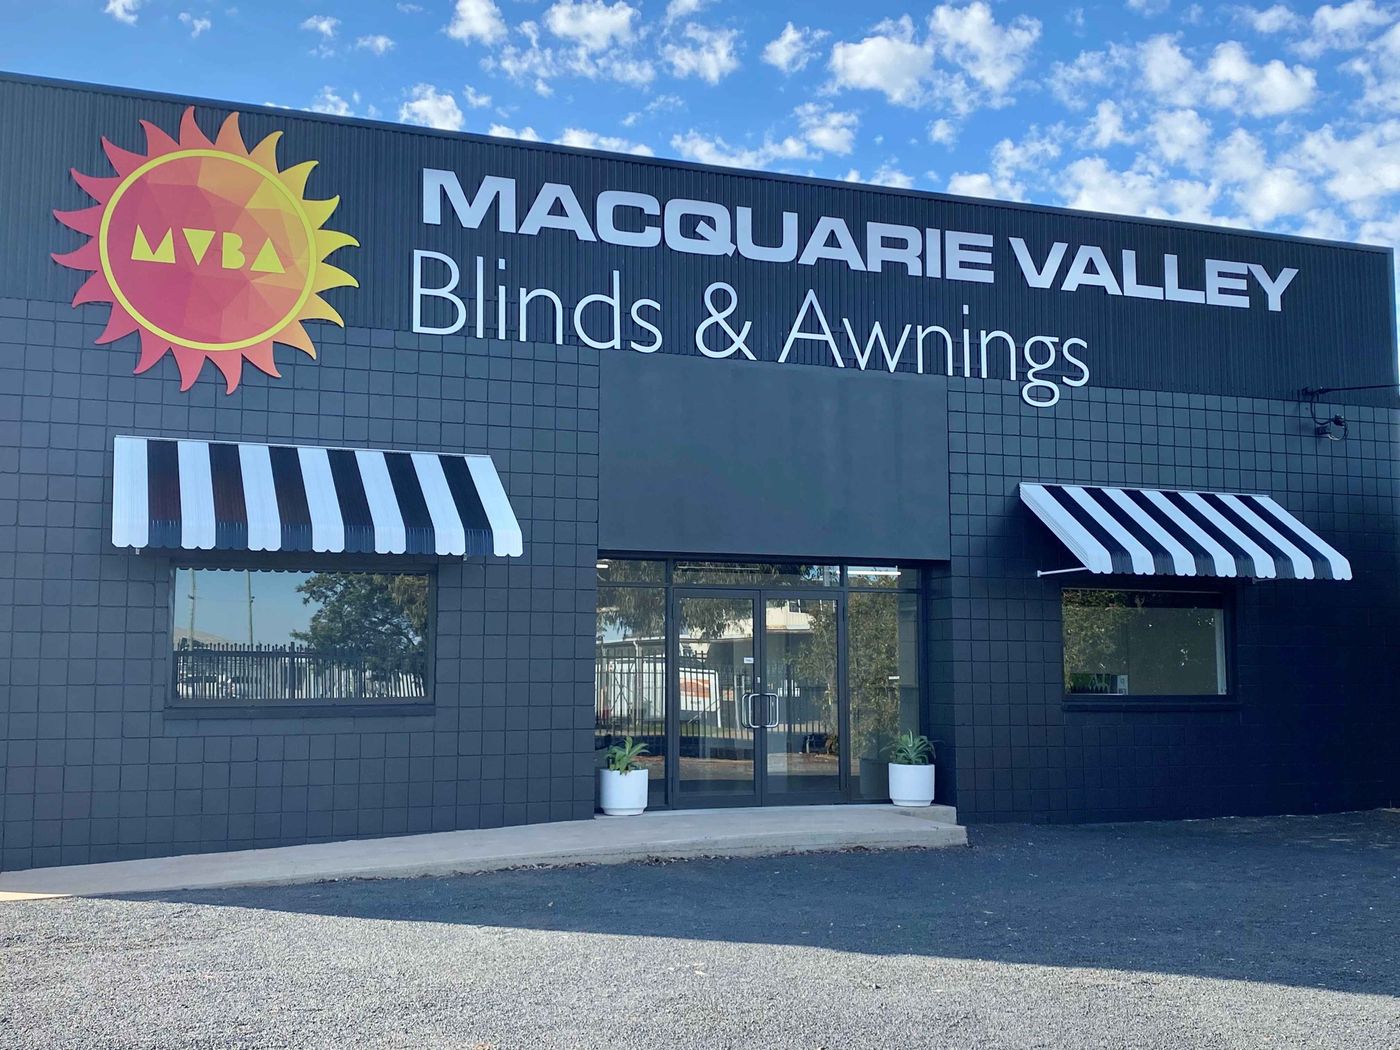 Macquarie Valley Blinds & Awnings image